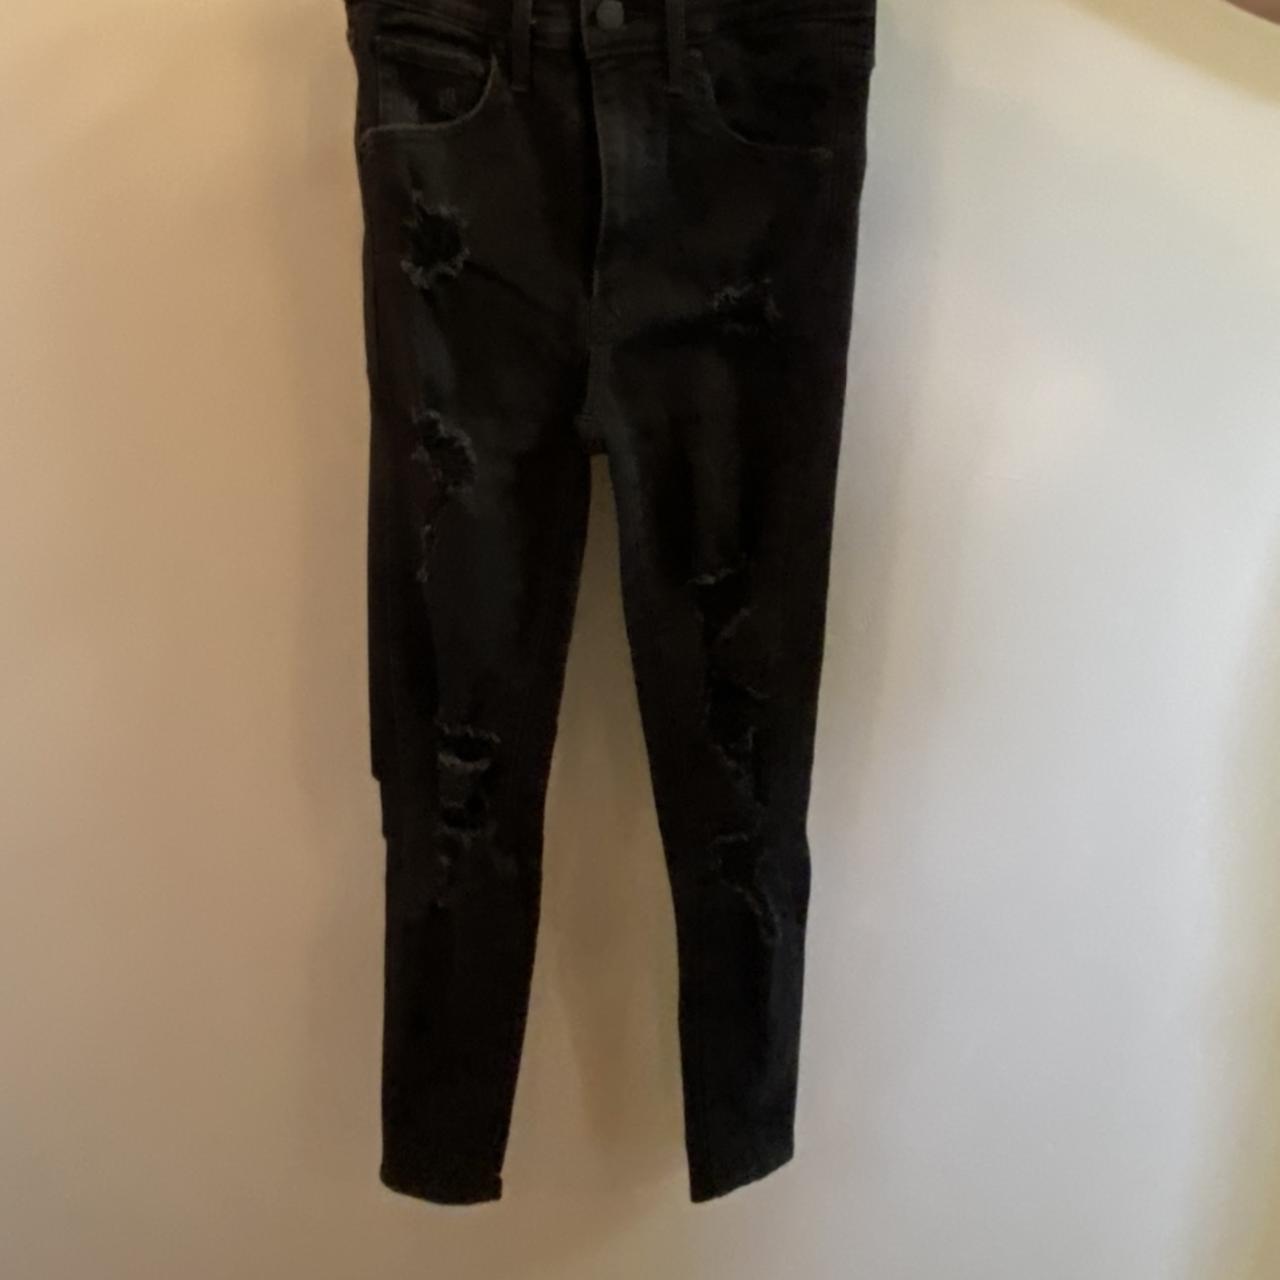 black levi ripped skinny jeans worn once or twice - Depop